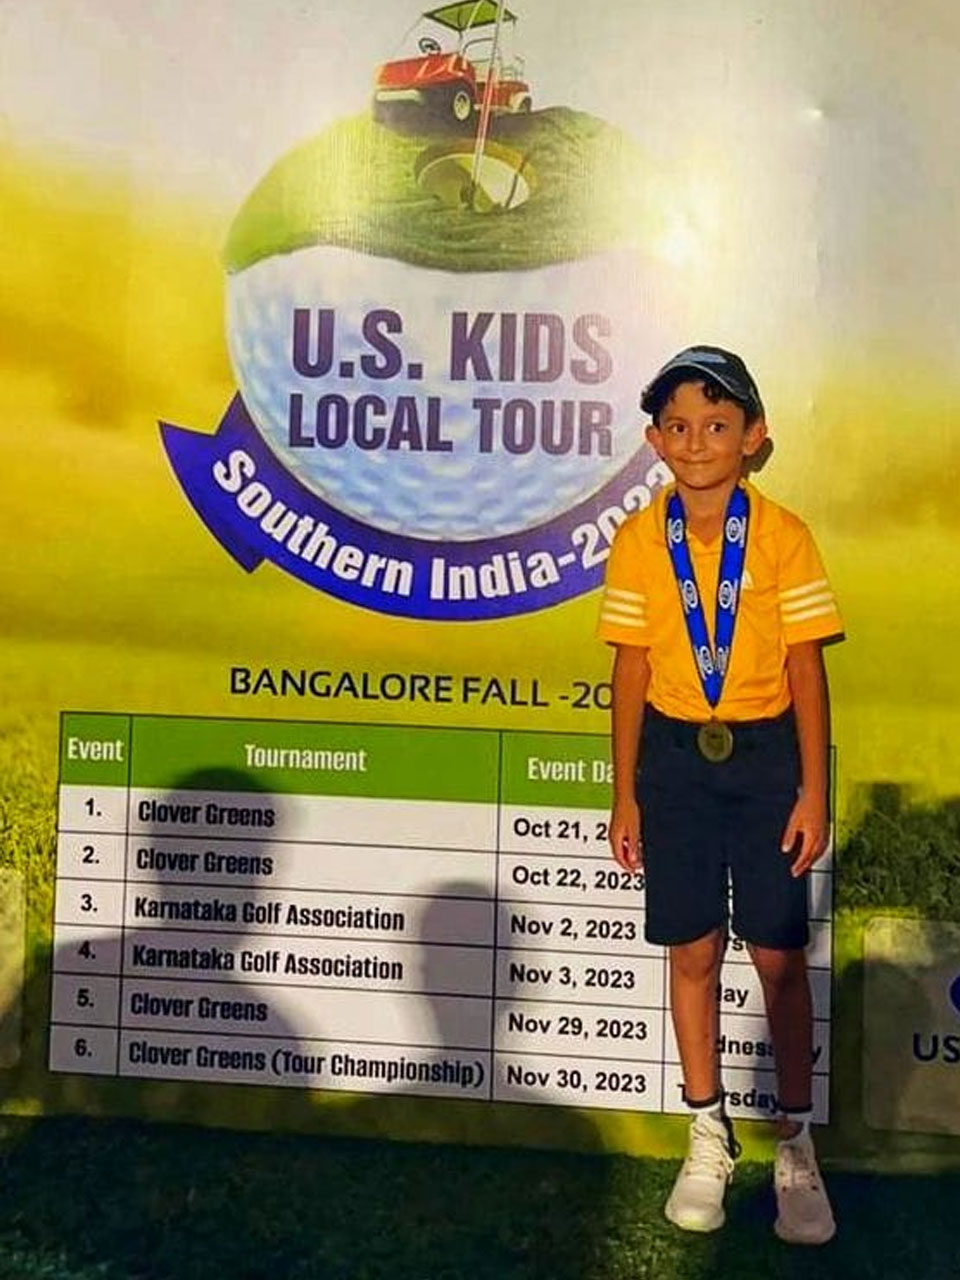 Ryan Advik wins in his category at both U.S. Kids Southern India events at Clover Greens